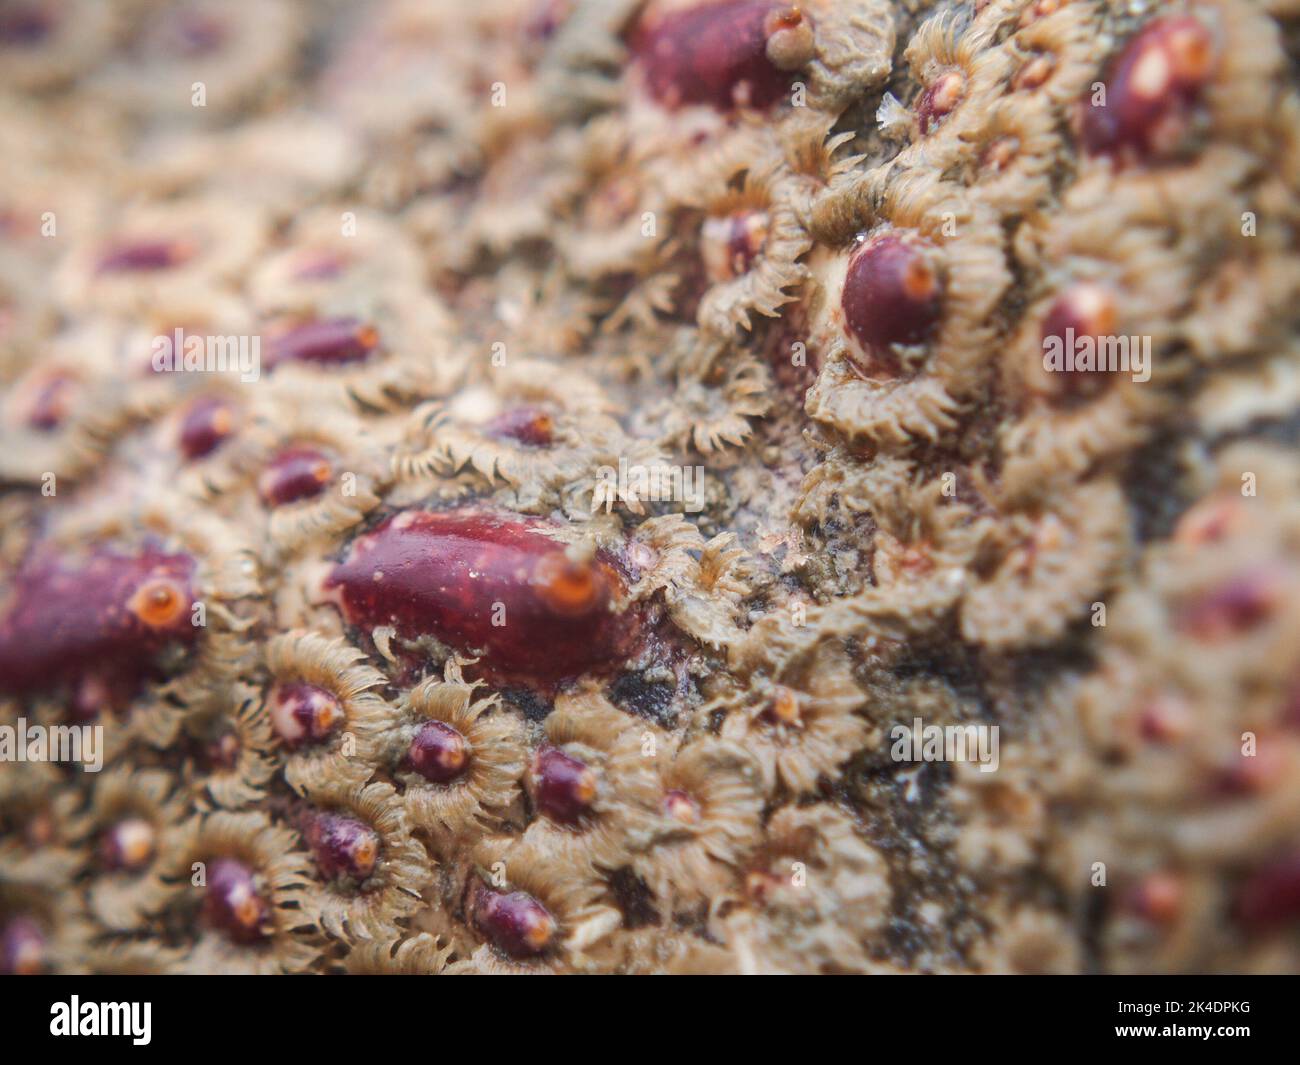 Anemone like growth in closeup on shell of Spiny red rock lobster Stock Photo